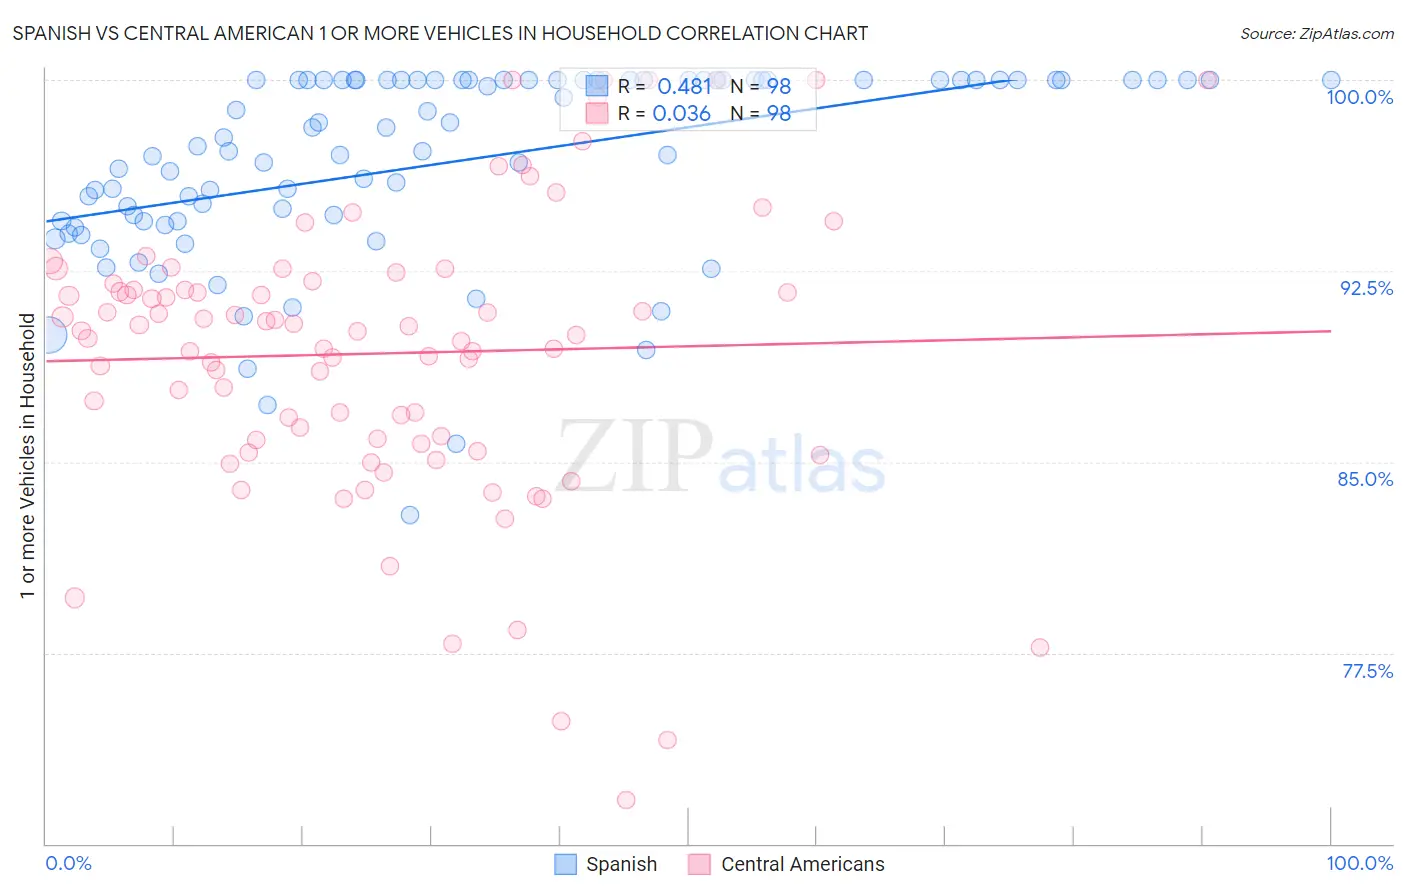 Spanish vs Central American 1 or more Vehicles in Household